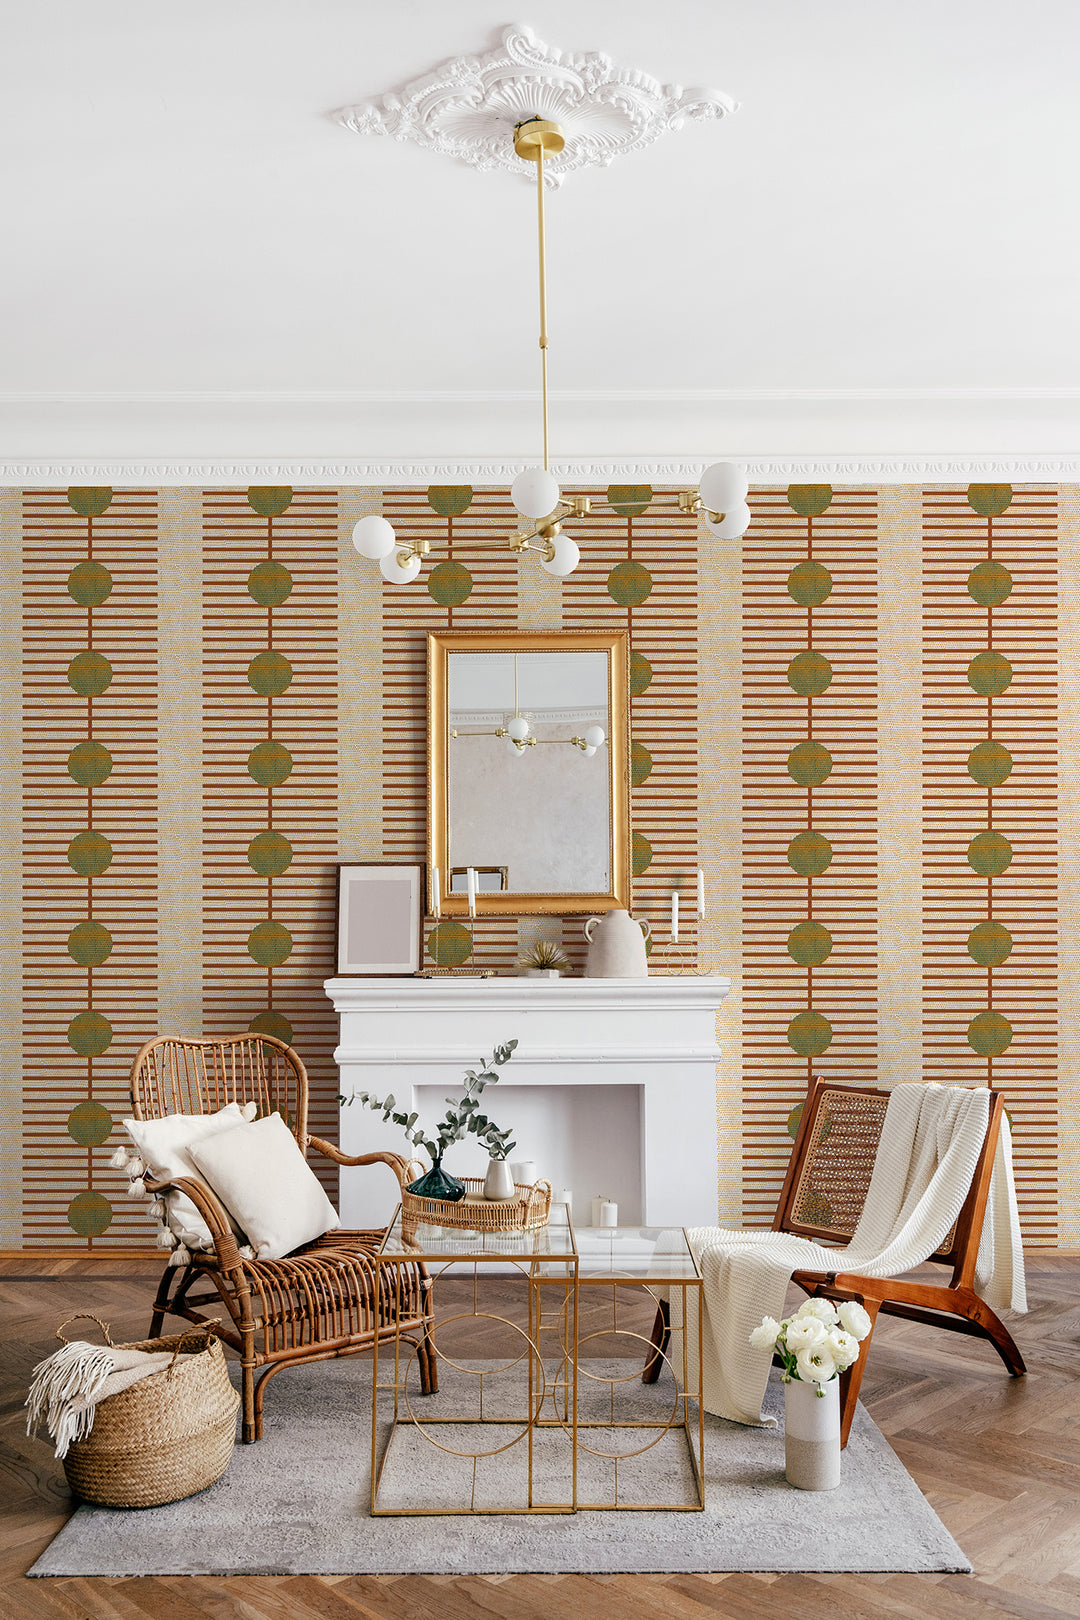 Nomalanga - Terracotta Wallpaper by Forbes + Masters